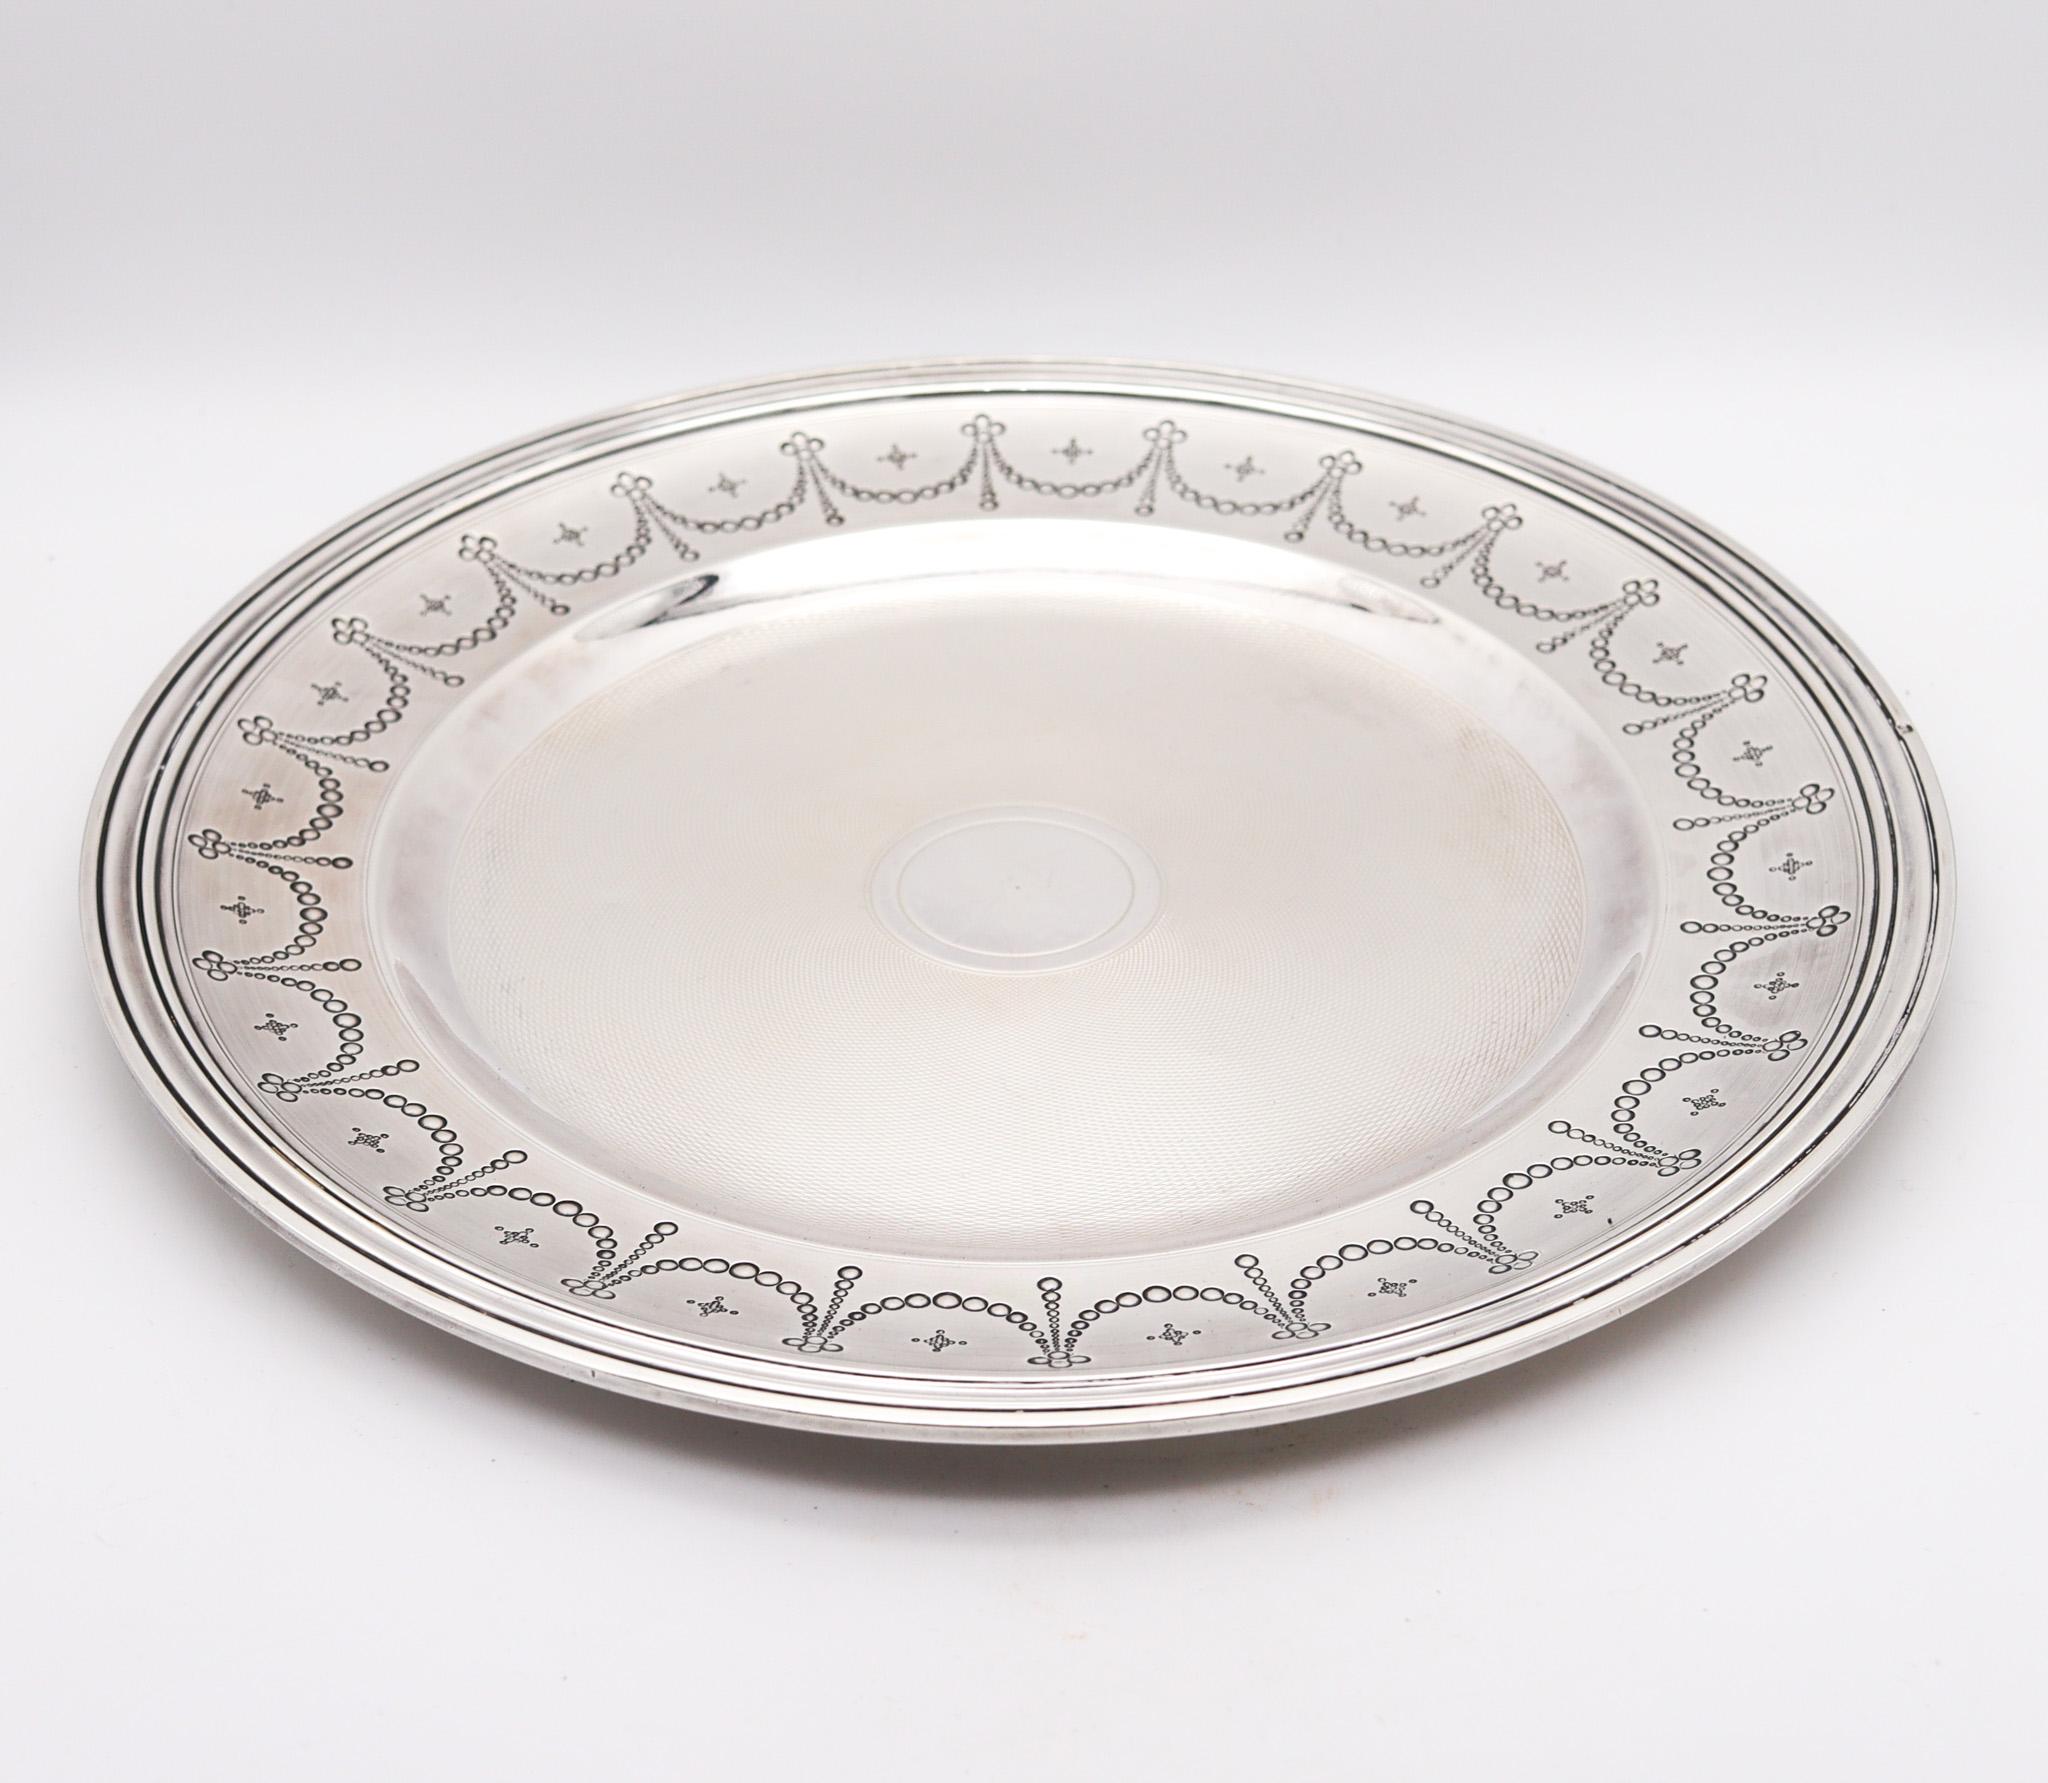 Neoclassical Tallois & Mayence 1885 Paris Covered Dish With Plate In .950 Sterling Silver For Sale